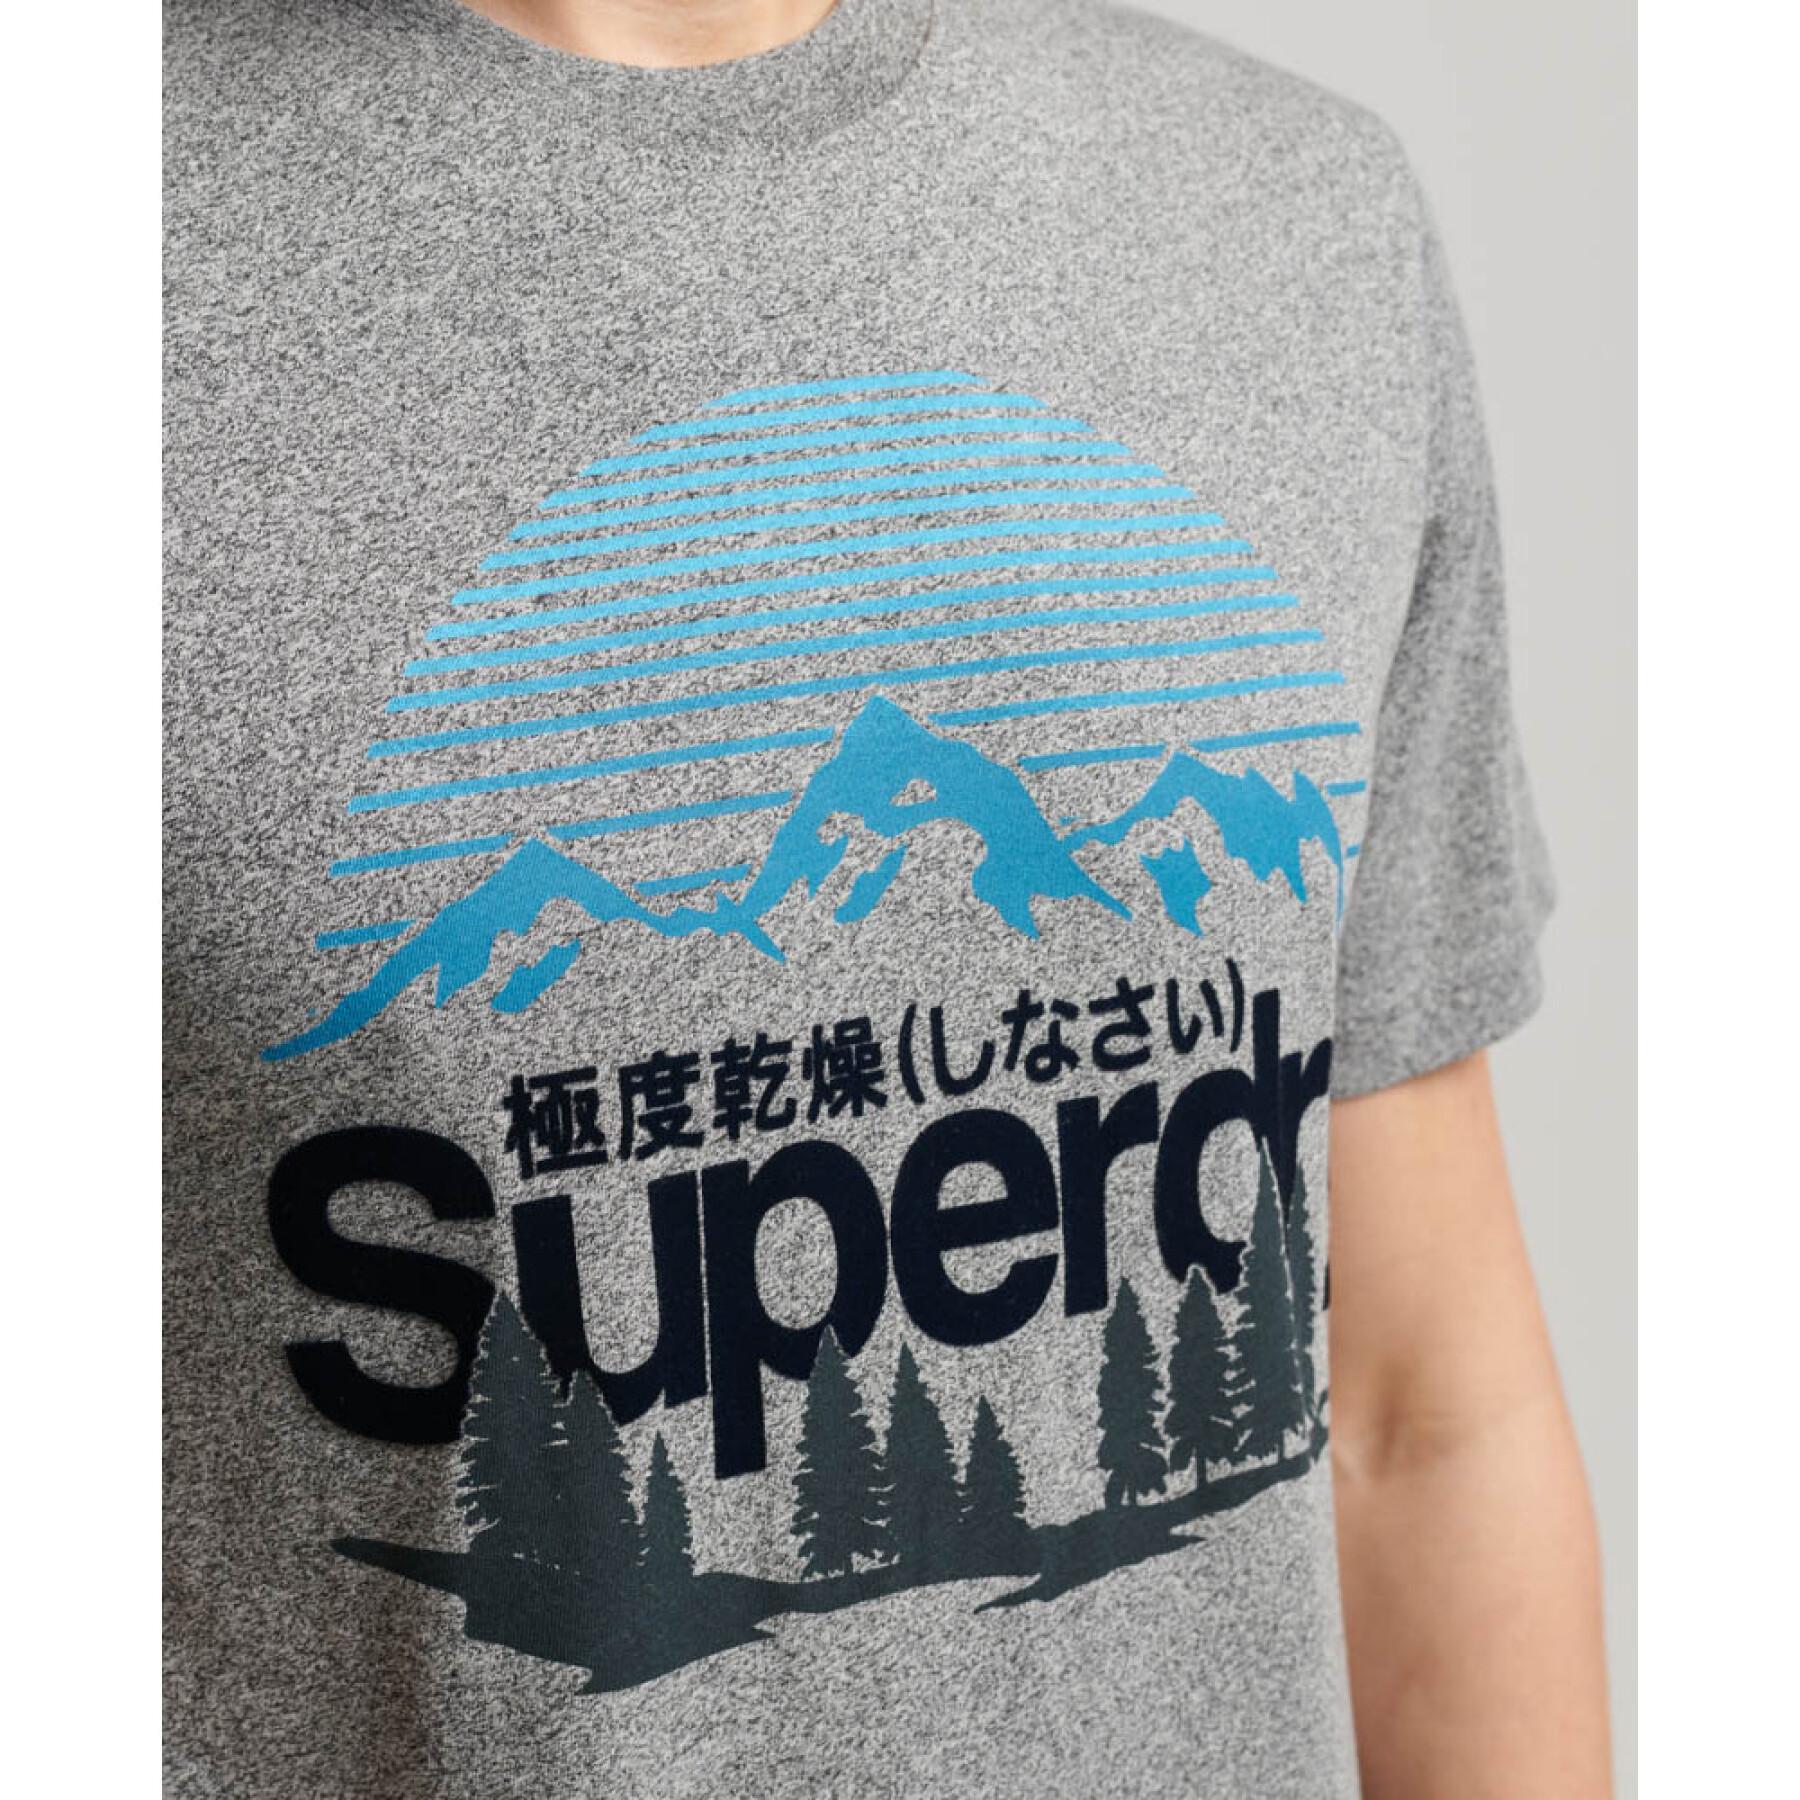 Maglietta Superdry Core Logo Great Outdoors